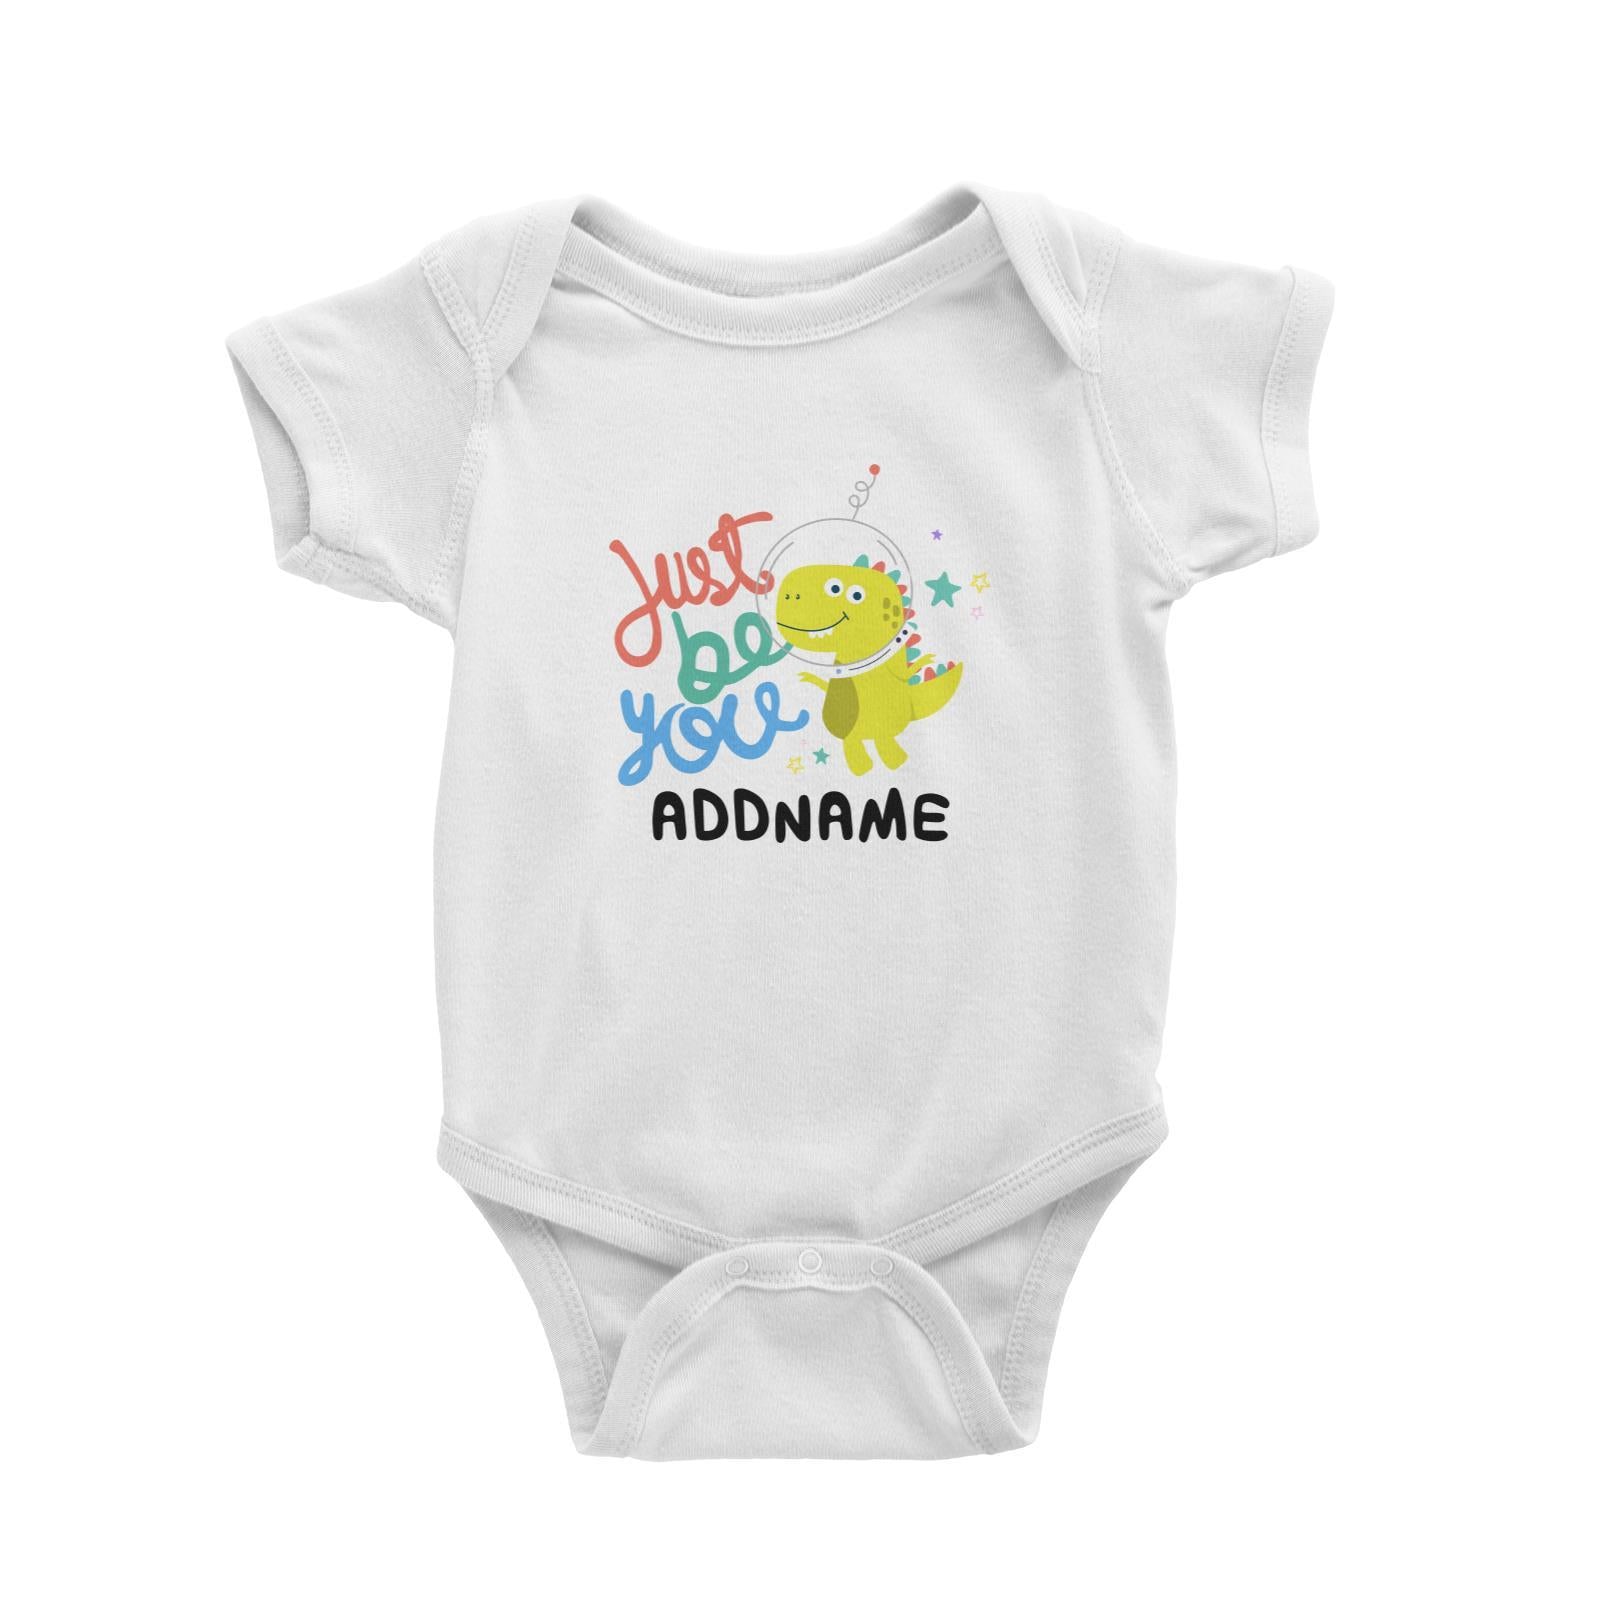 Children's Day Gift Series Just Be You Space Dinosaur Addname Baby Romper